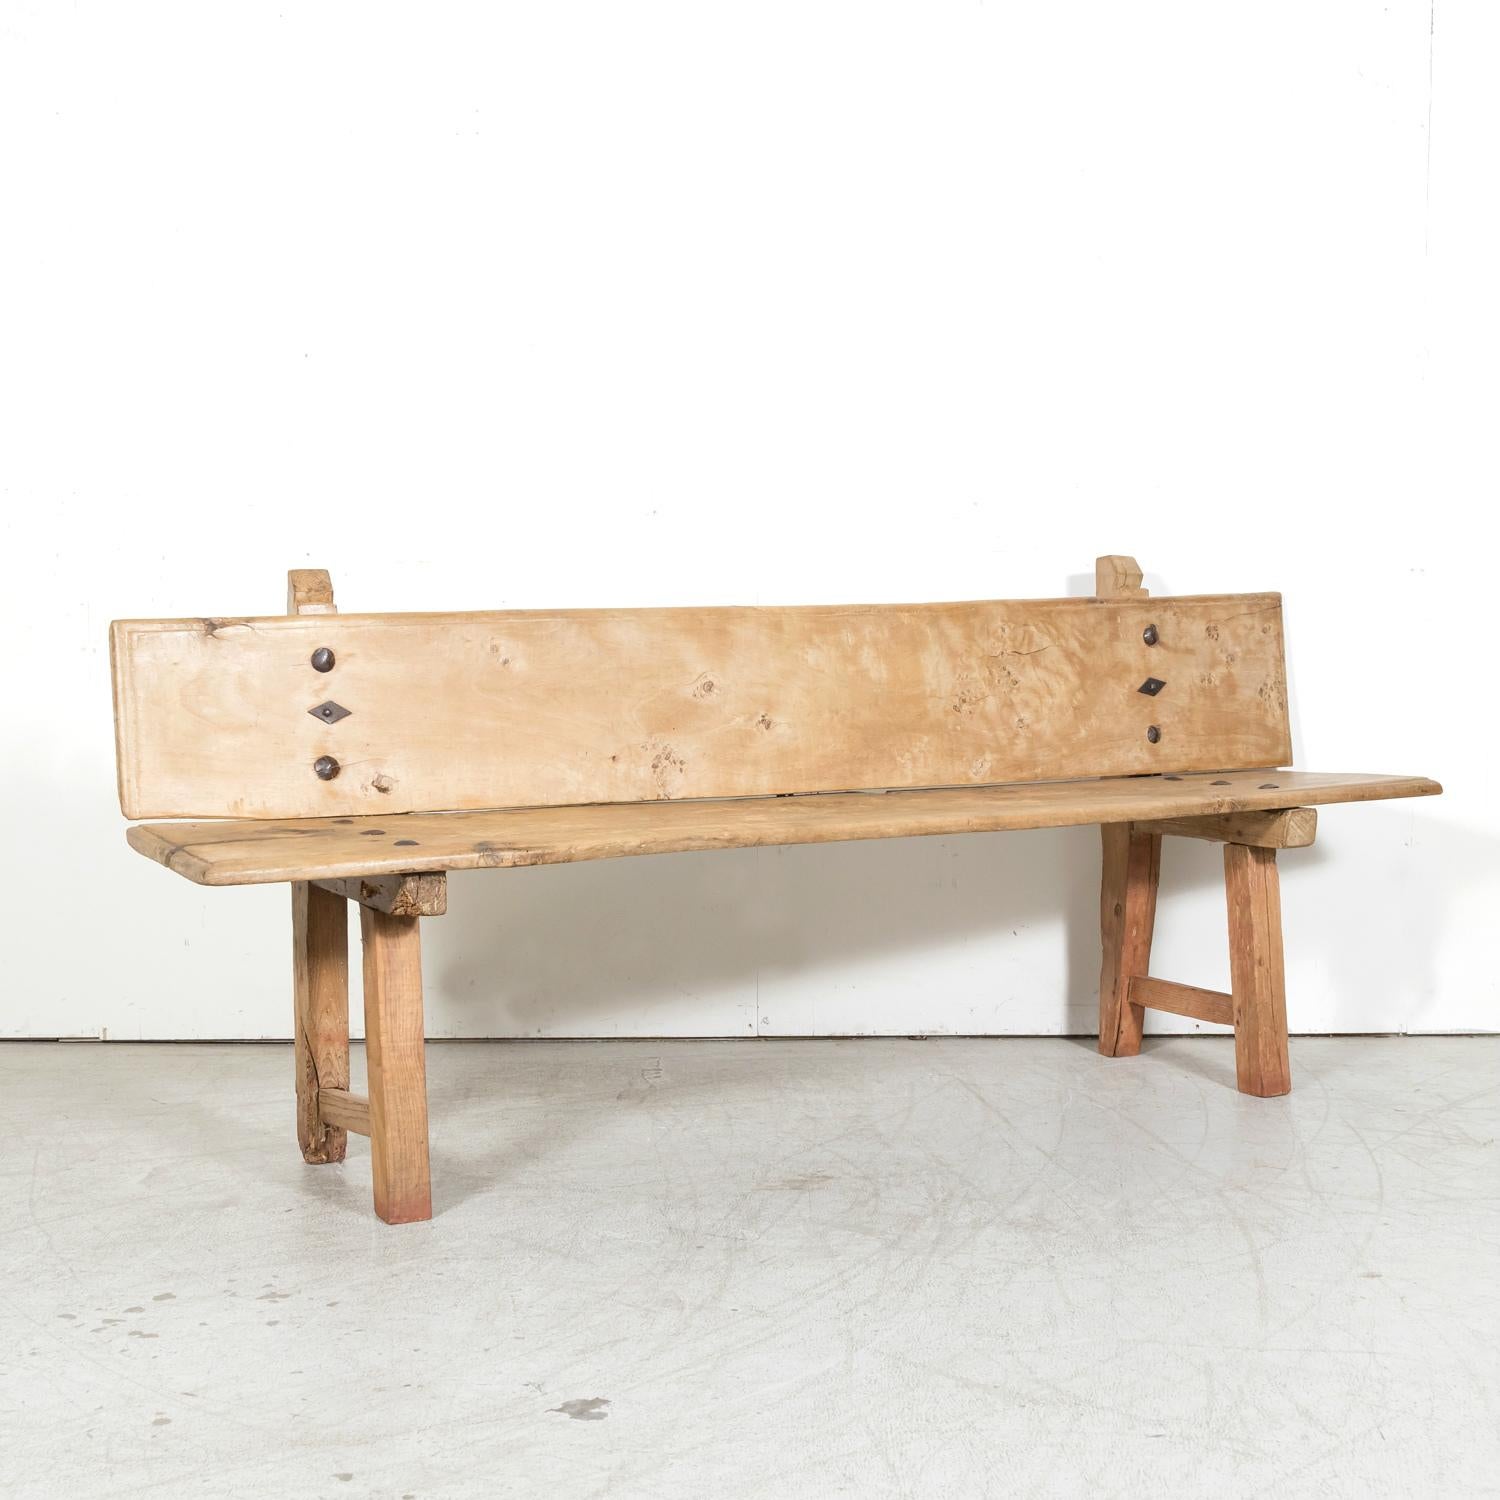 A large 18th century primitive bench from the Catalan region of Spain, circa 1780s. Handcrafted from mélèze, a robust pine variety native to mountainous areas, its construction speaks to the skill and craftsmanship of its time. This antique Spanish